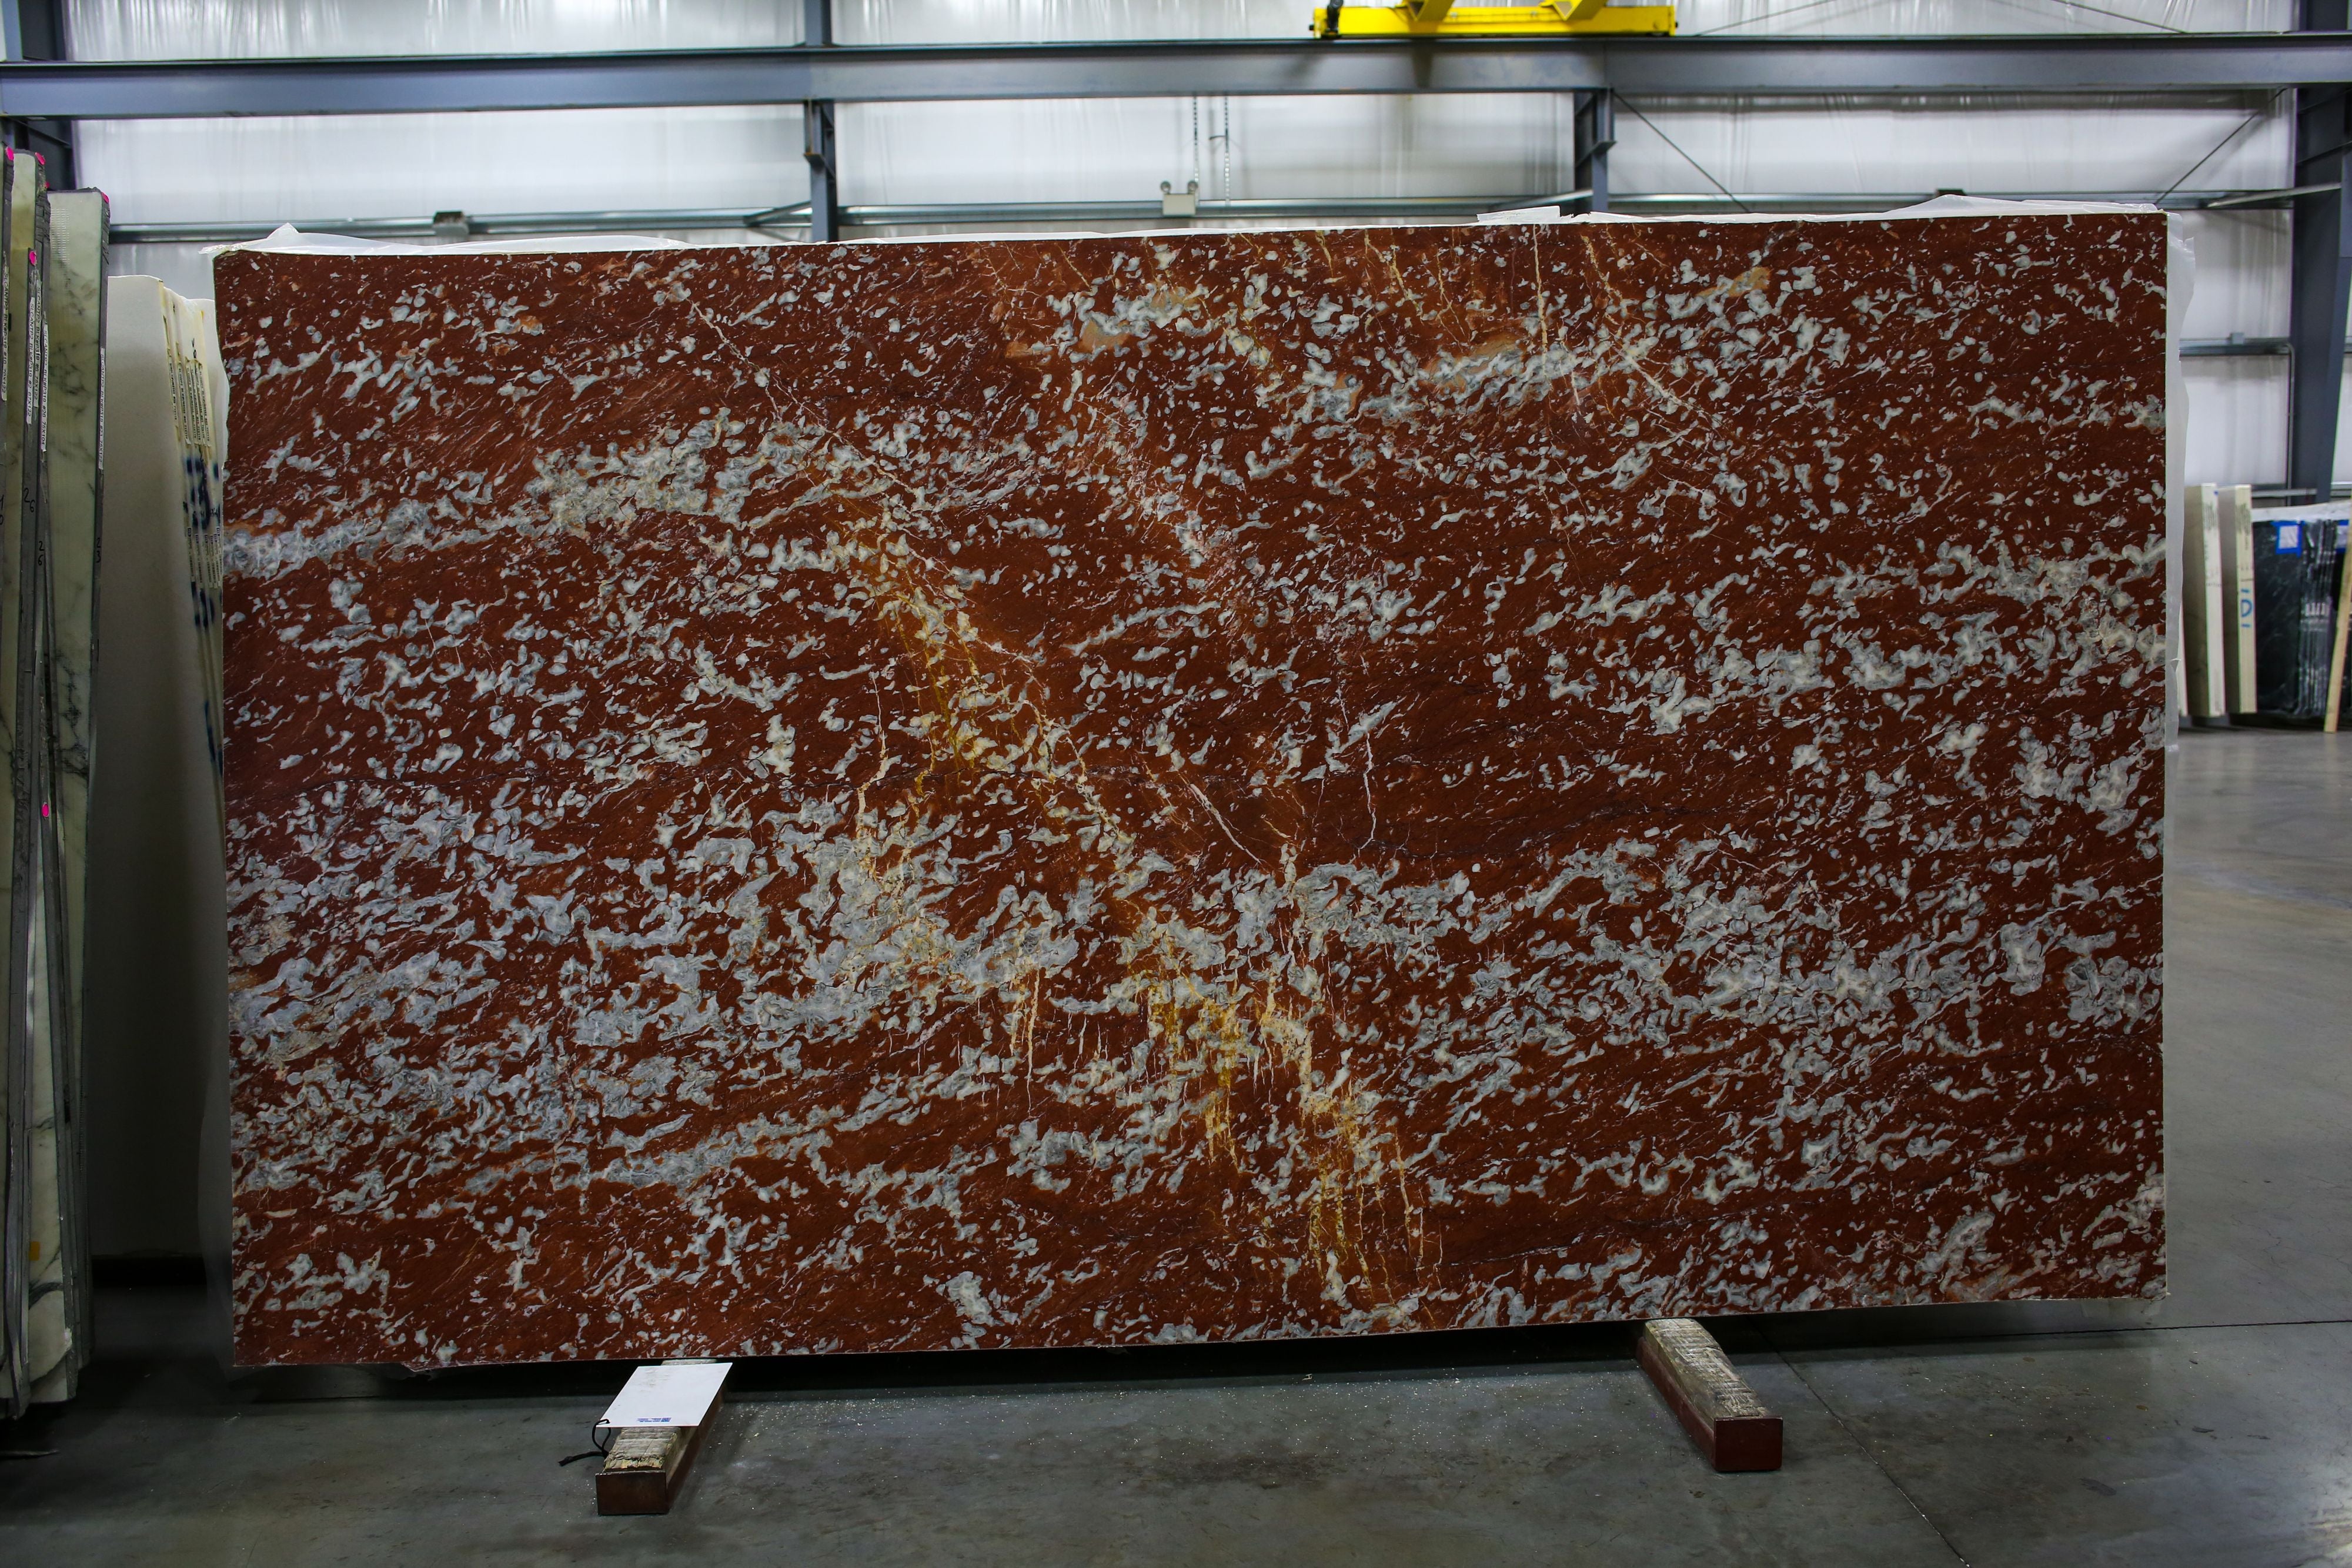  Rosso Francia Marble Slab 3/4  Honed Stone - 55190#09 -  71X112 